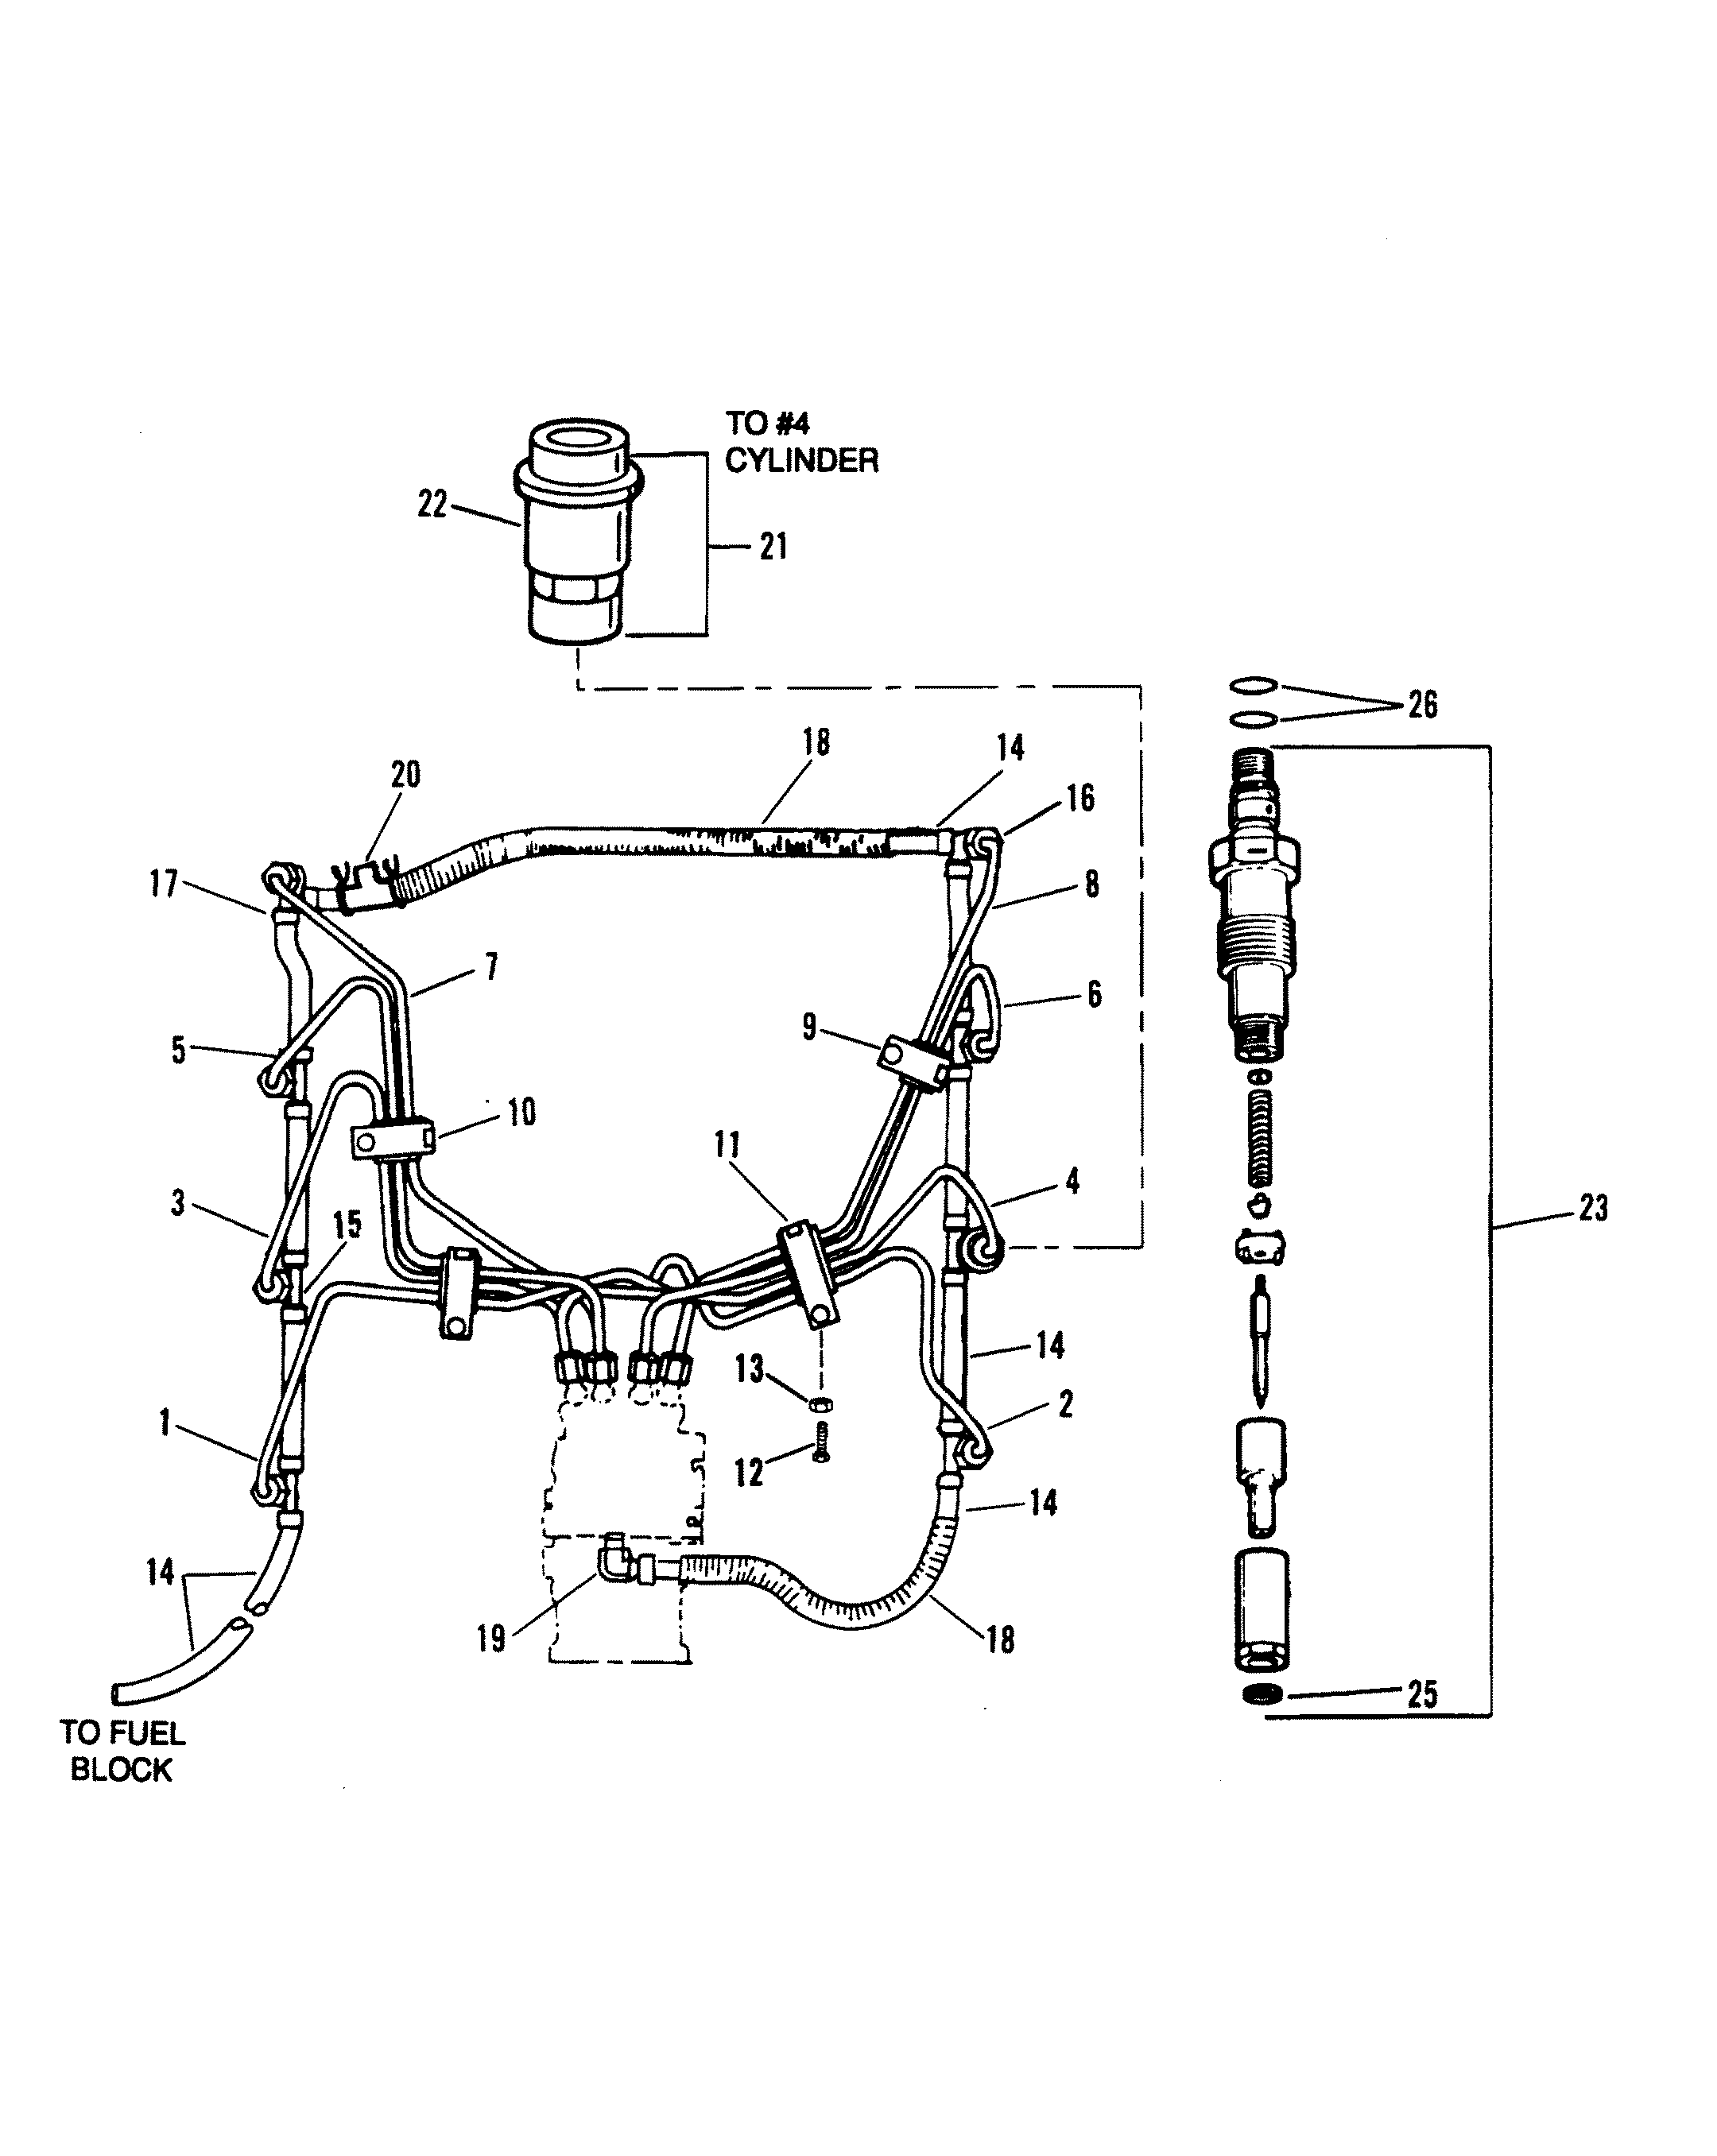 INJECTORS AND HOSES (S/N F060103 AND BELOW)